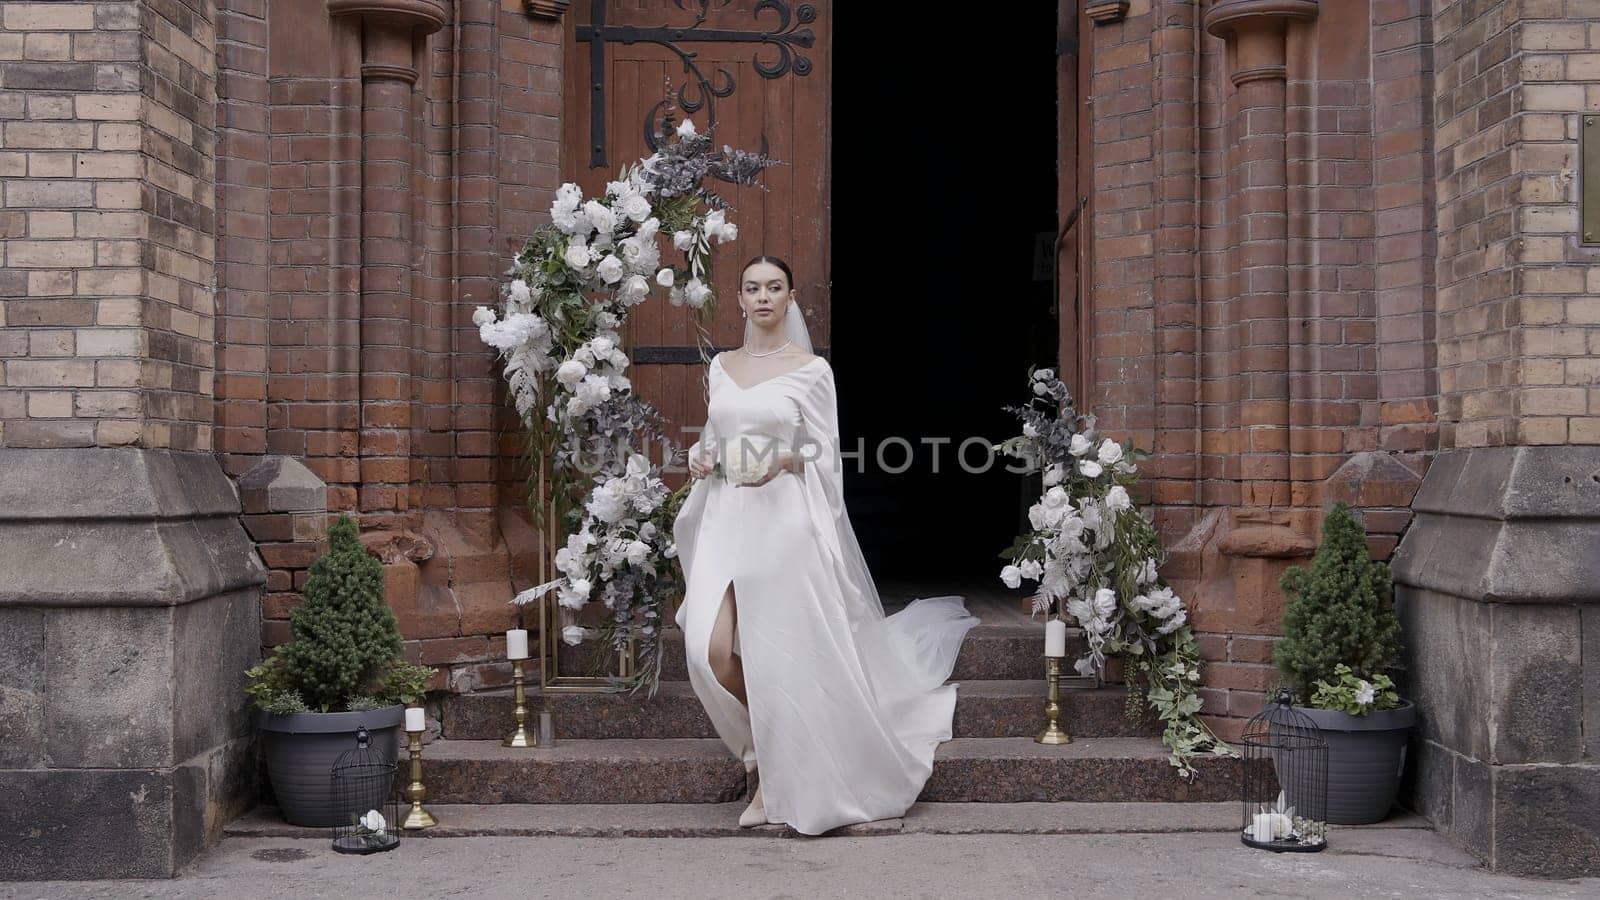 A young bride coming out of their temple. Action.A beautiful girl in a white dress with flowers who comes out of a dark building and there is an arch of white flowers nearby. by Mediawhalestock